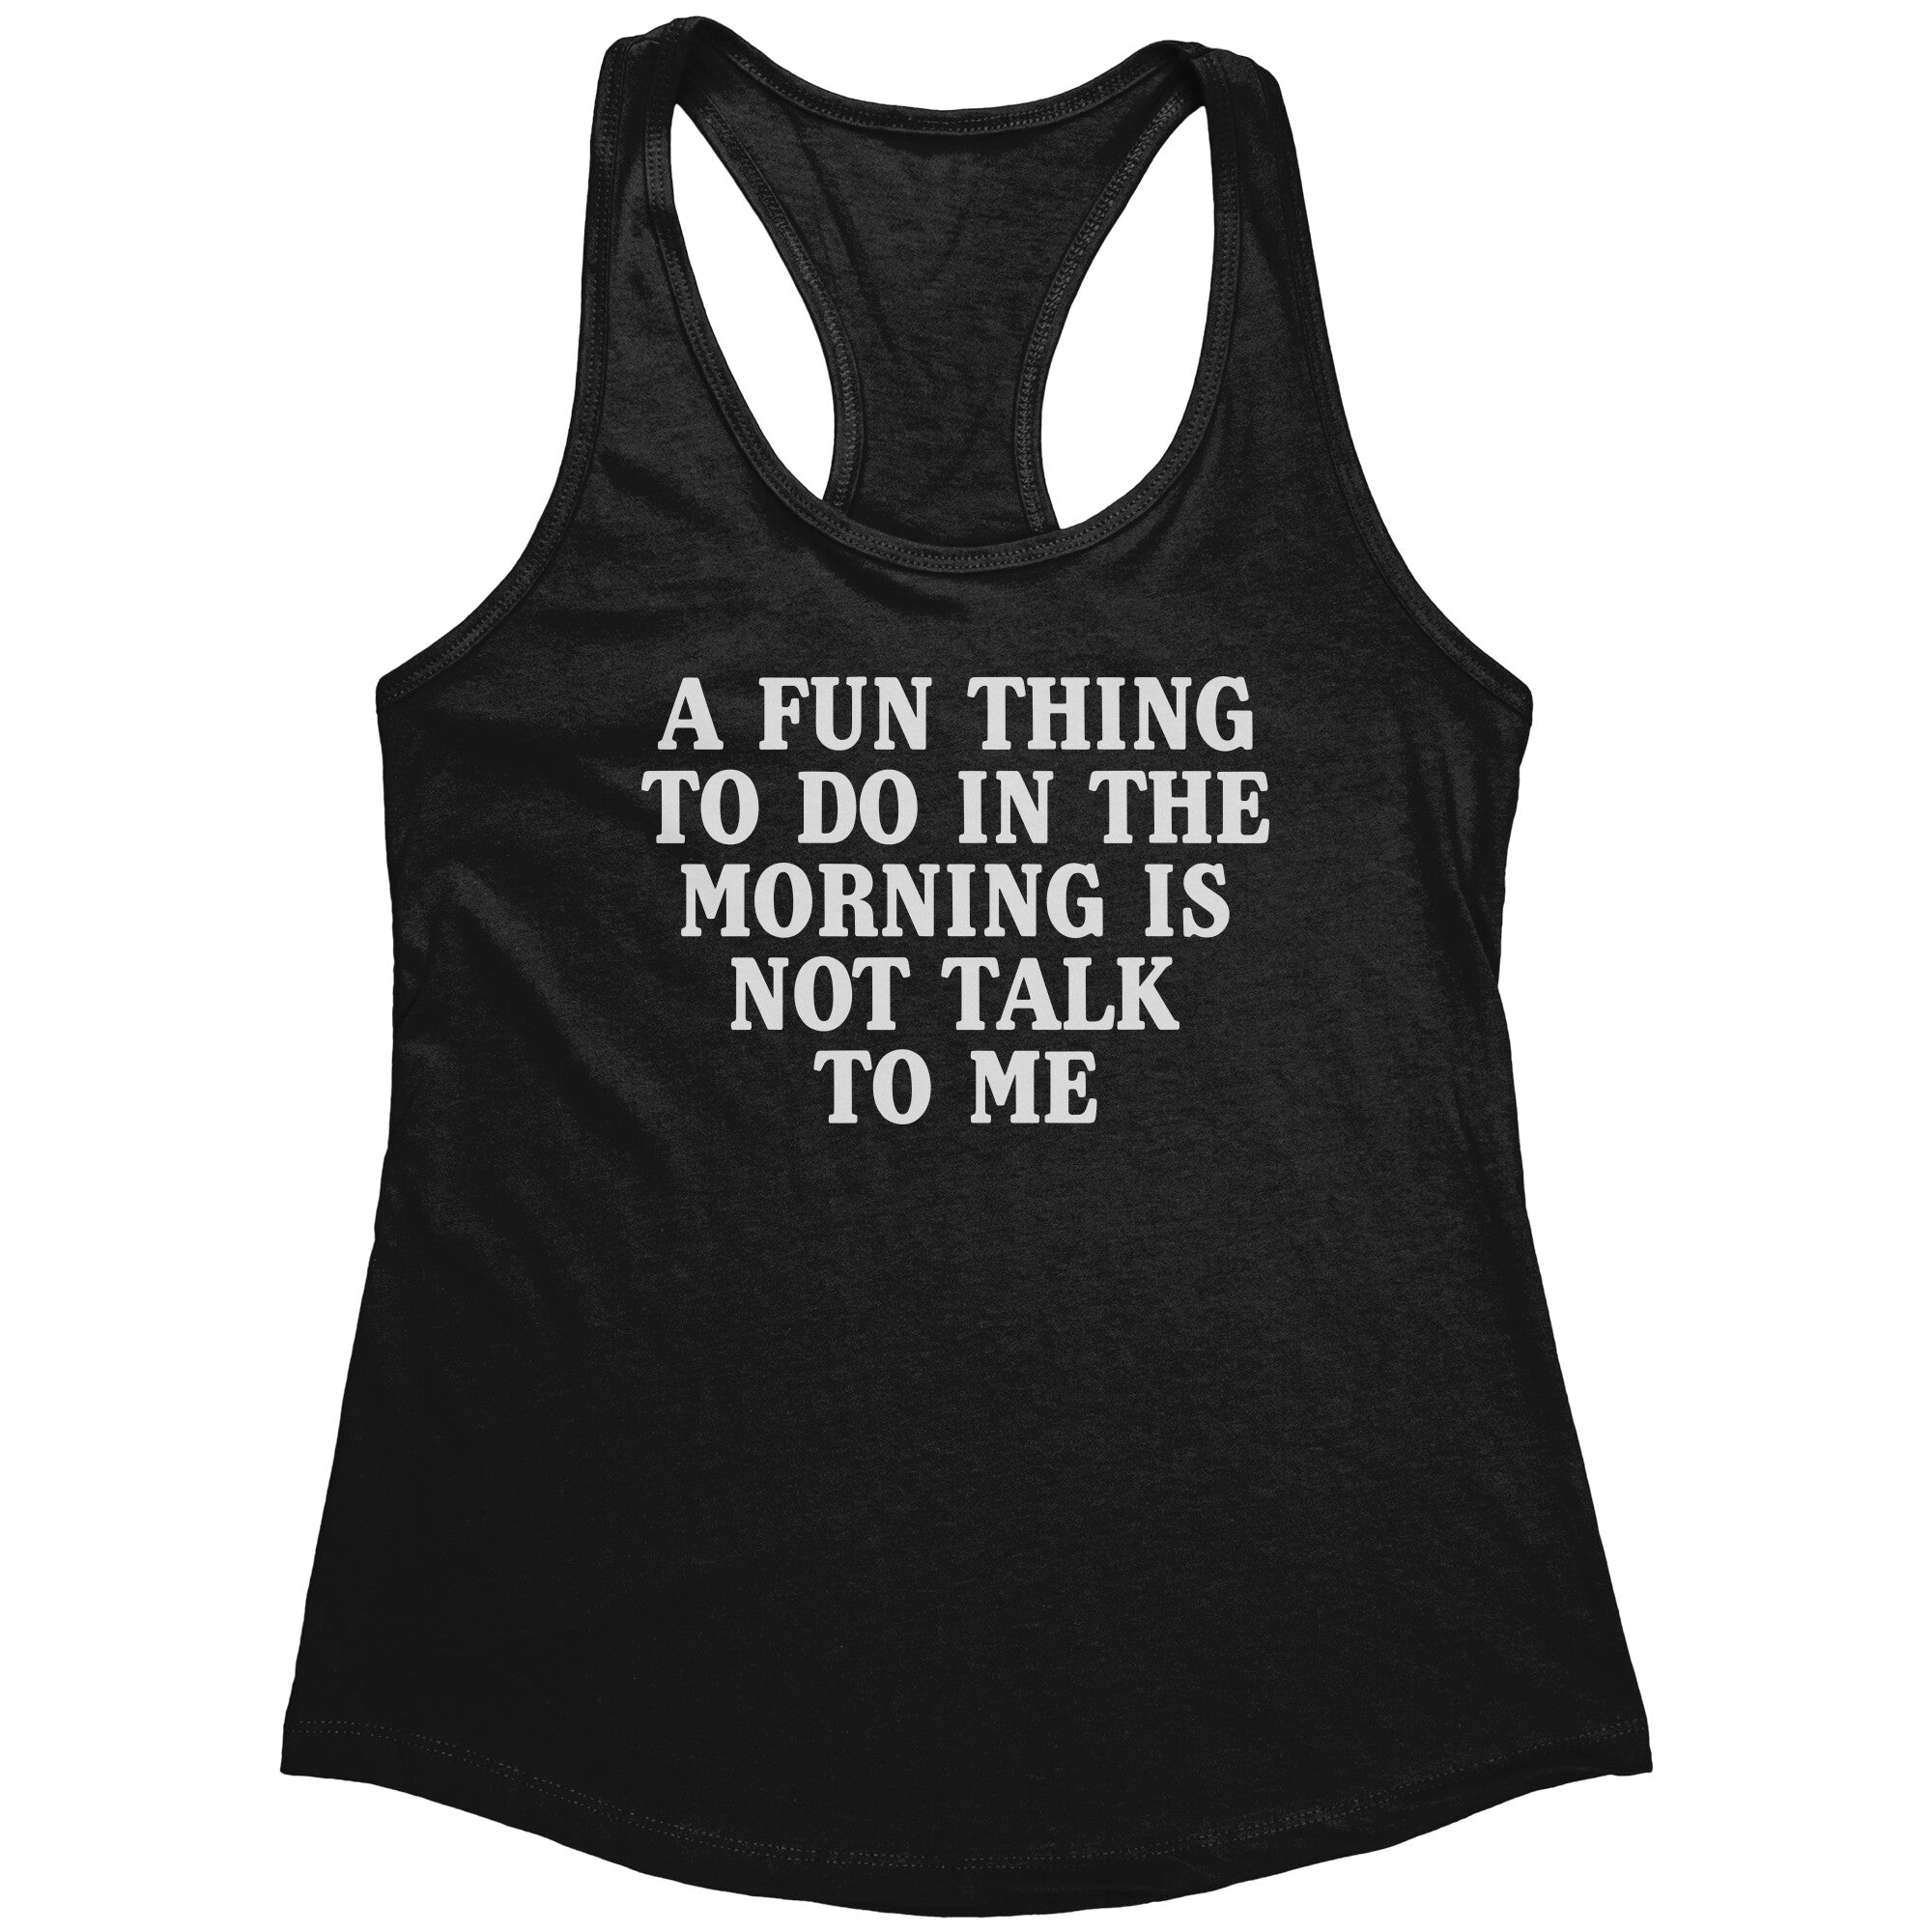 A Fun Thing To Do In The Morning Is Not Talk To Me (Ladies) -Apparel | Drunk America 